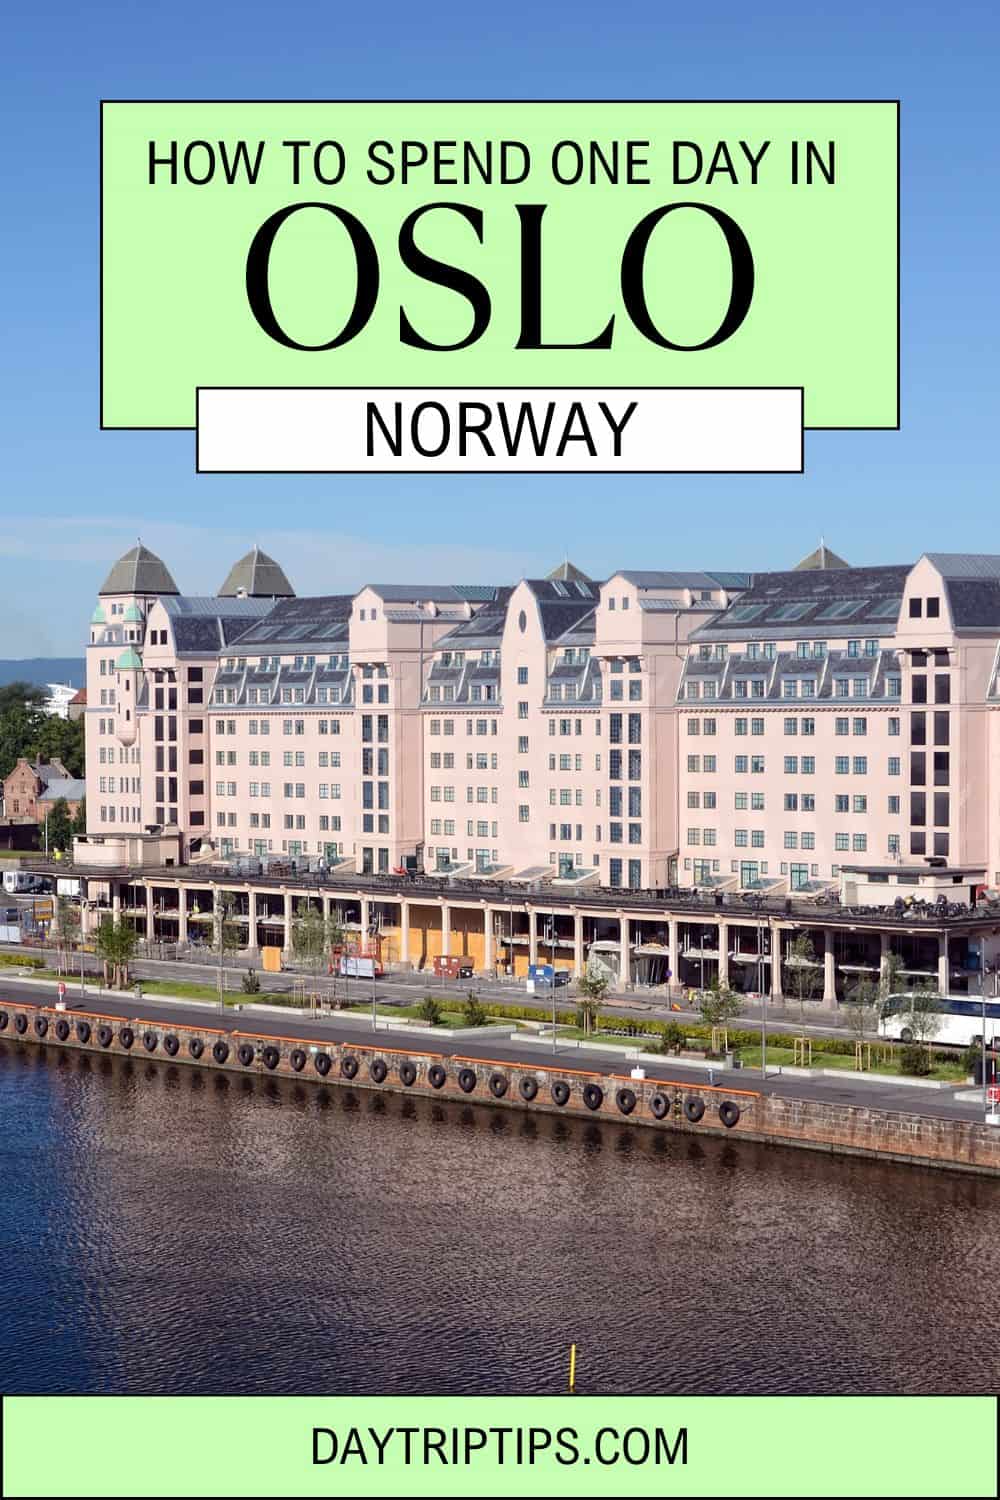 One Day in Oslo Norway: Full Itinerary of Things to See